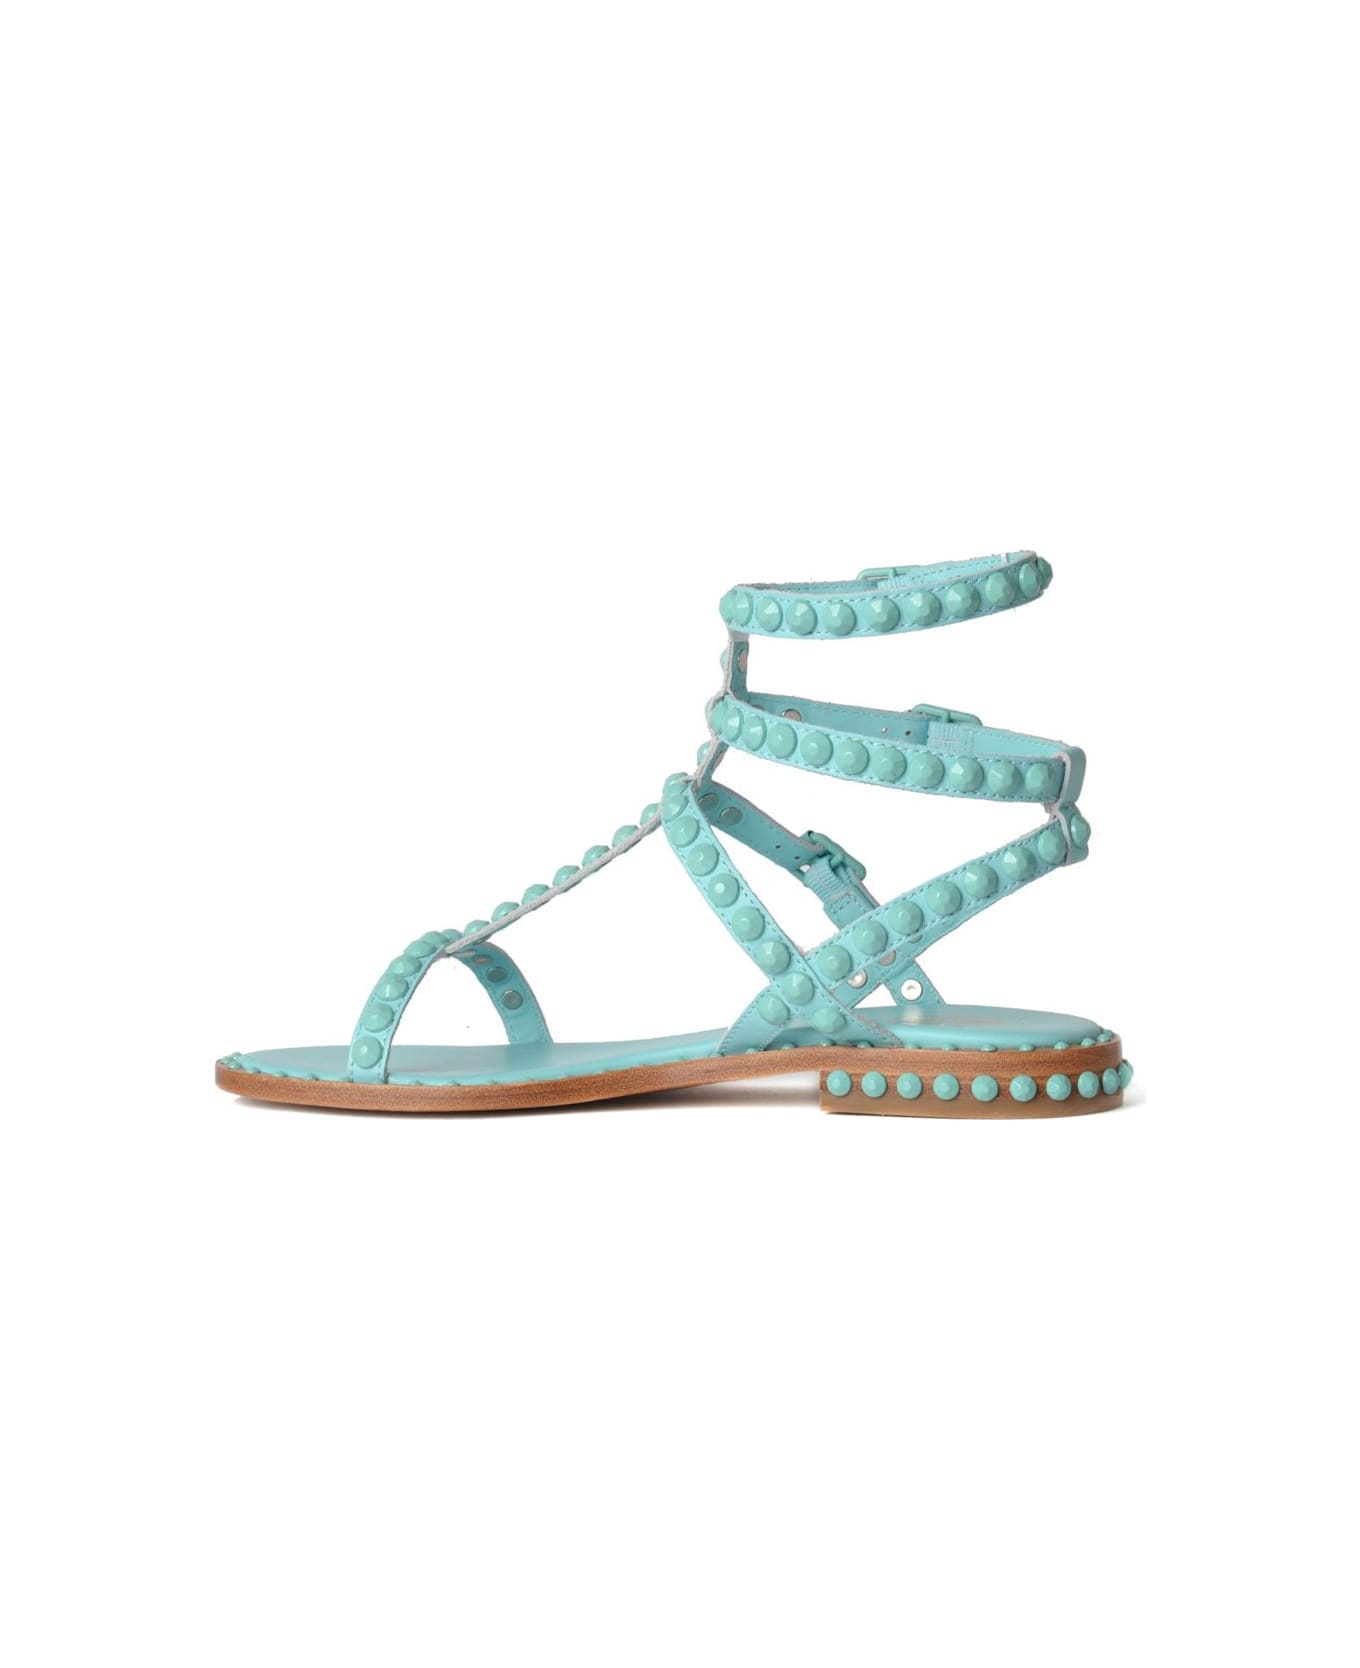 Ash New Crystal Rose Playbis Sandals - Pink